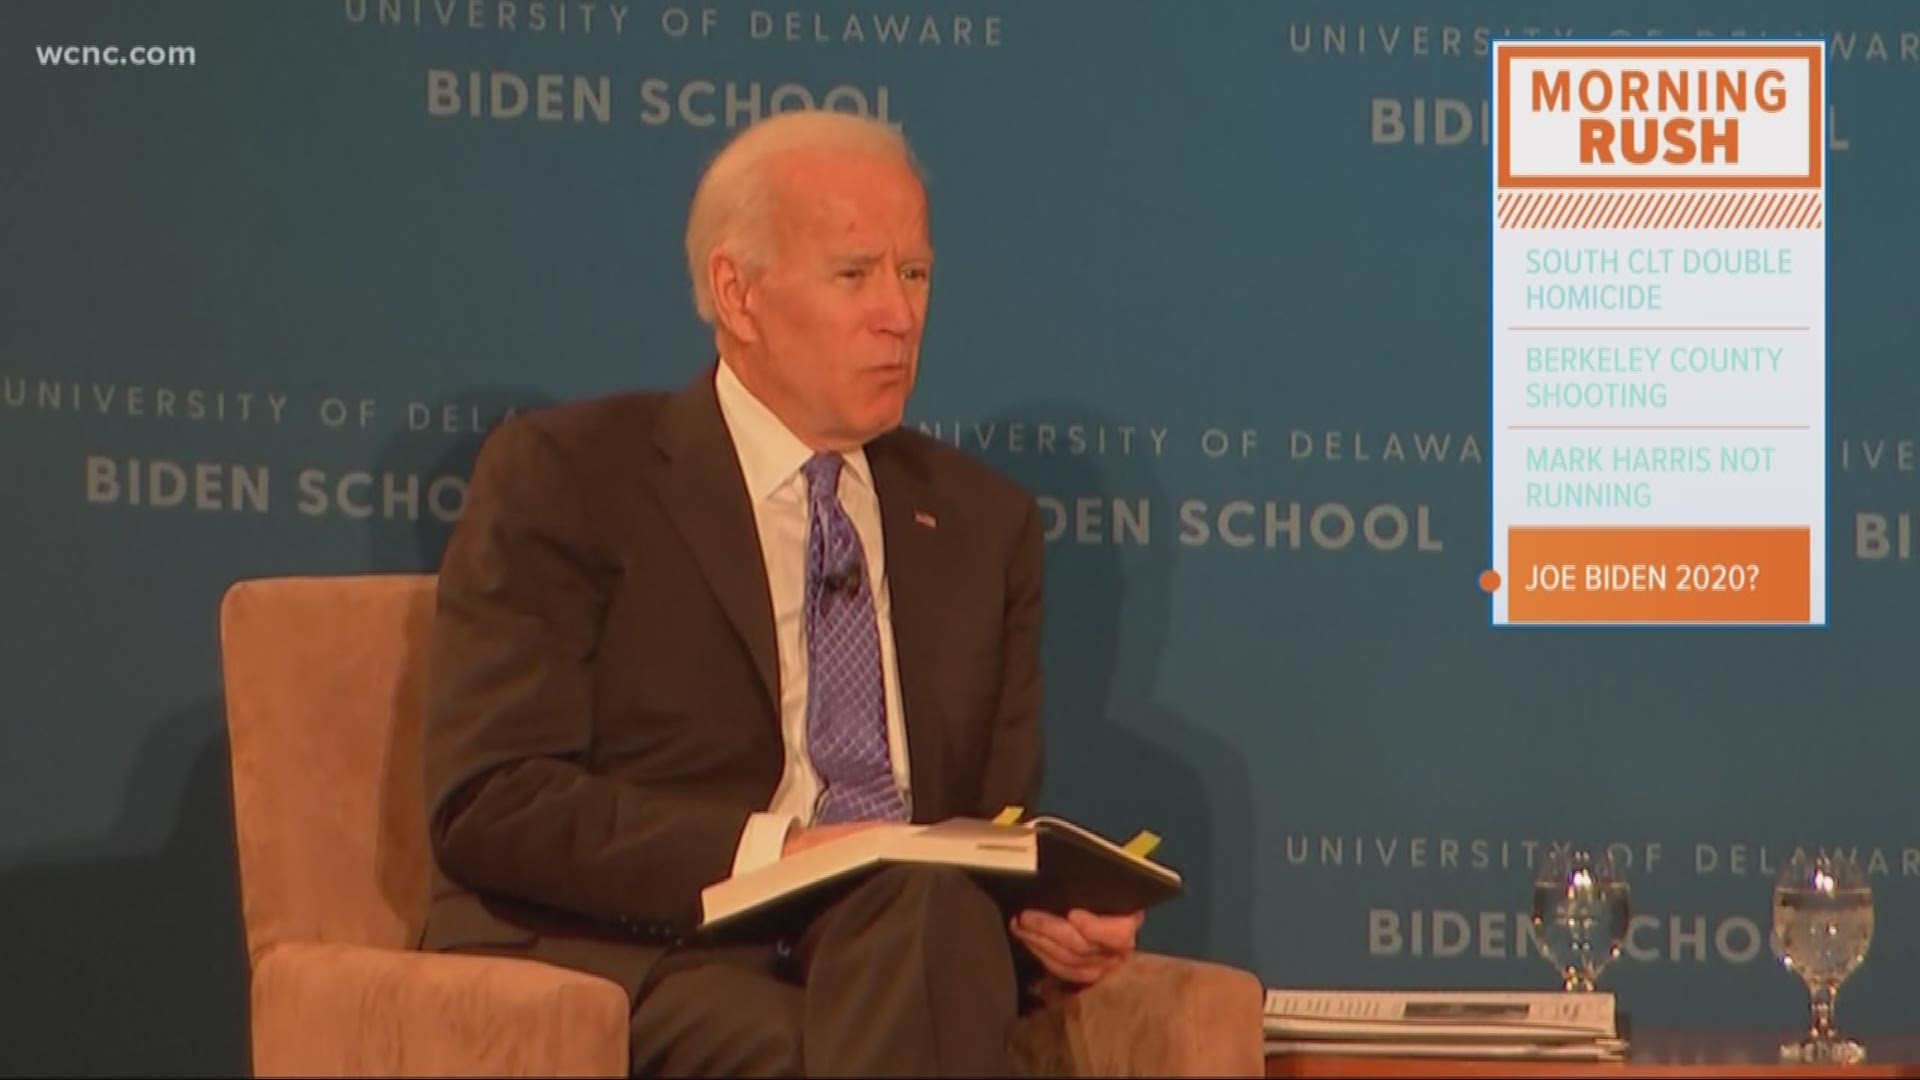 Former Vice President Joe Biden said his family wants him to run for president in 2020. If he chooses to run, he would be the 11th Democrat to announce a campaign.